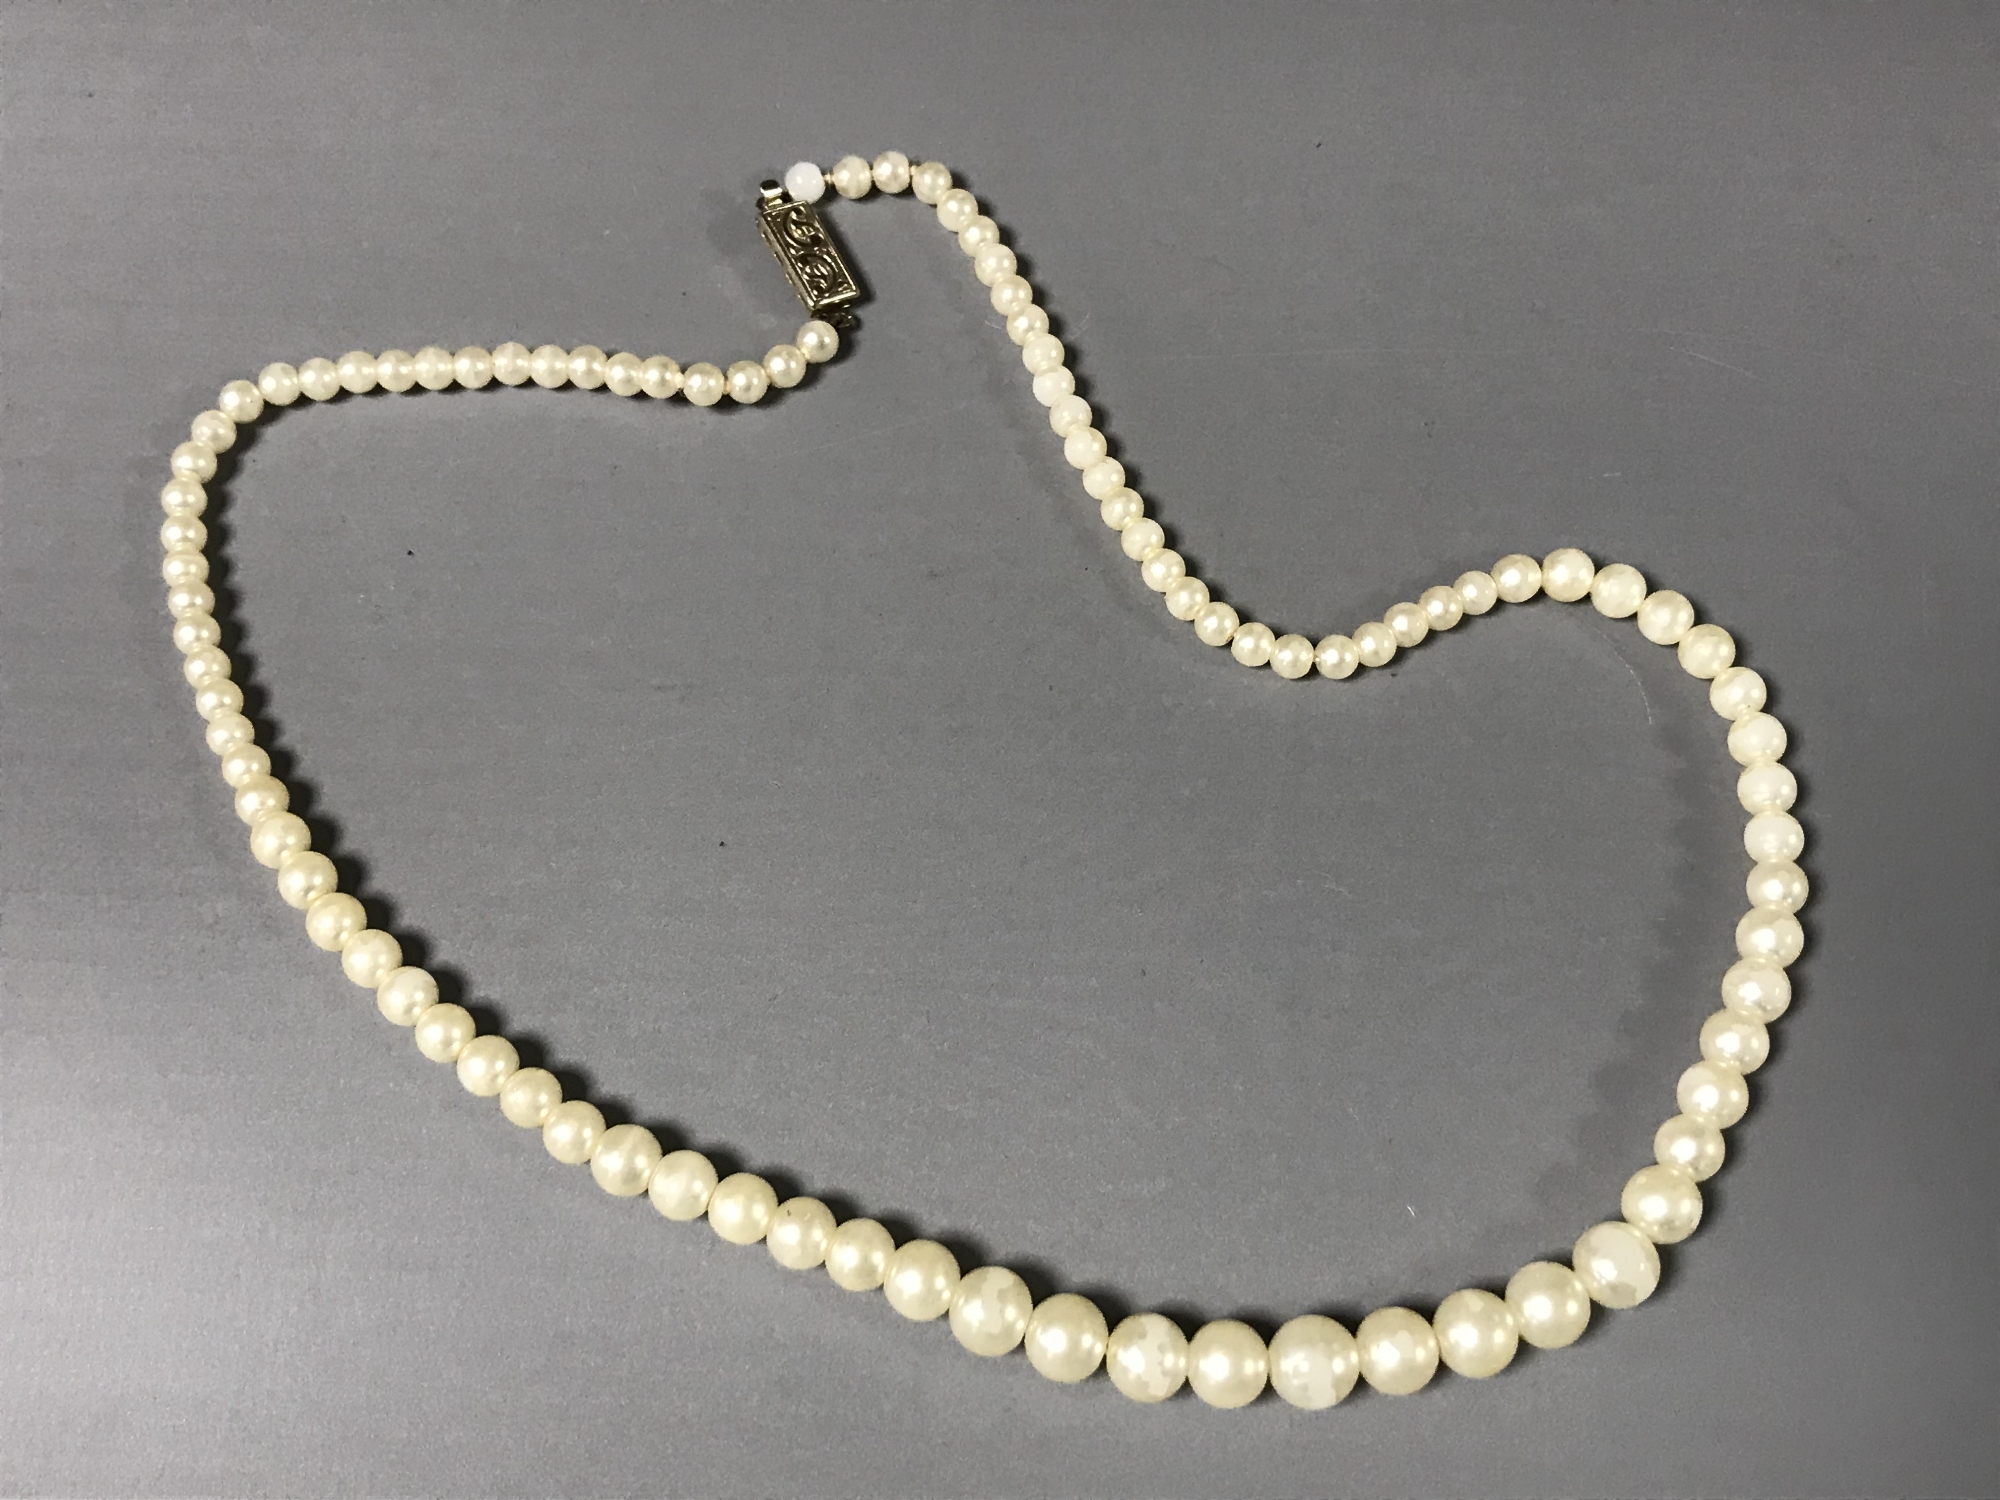 A cultured pearl necklace with sterling silver clasp